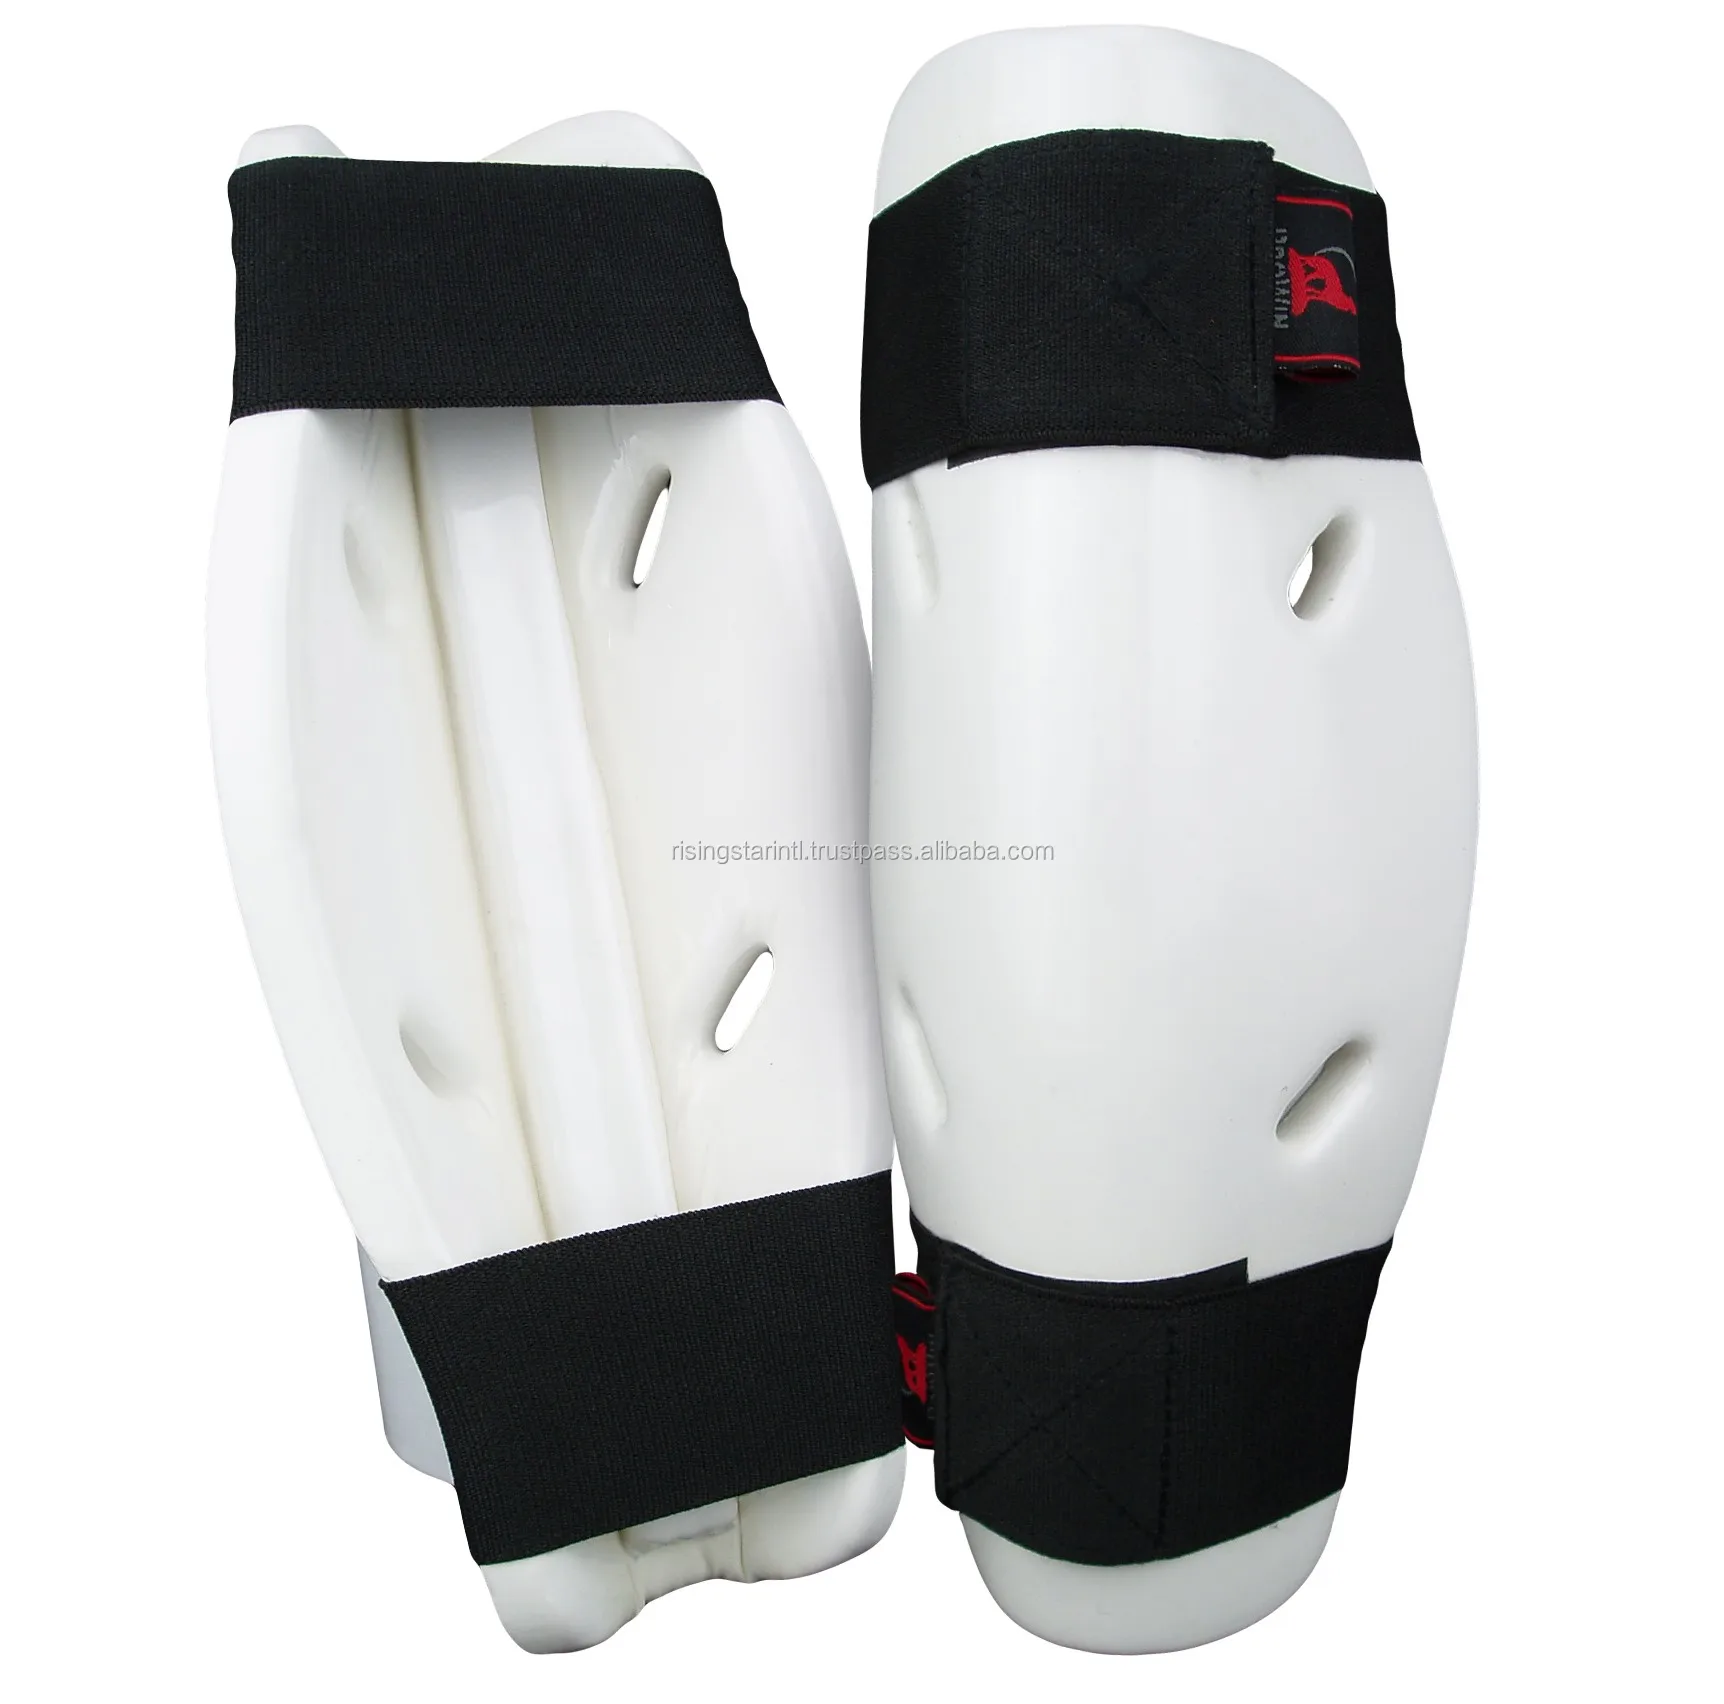 New Dipped Foam Sparring FOREARM Guards Pads Martial Arts Karate TKD Arm Guard 